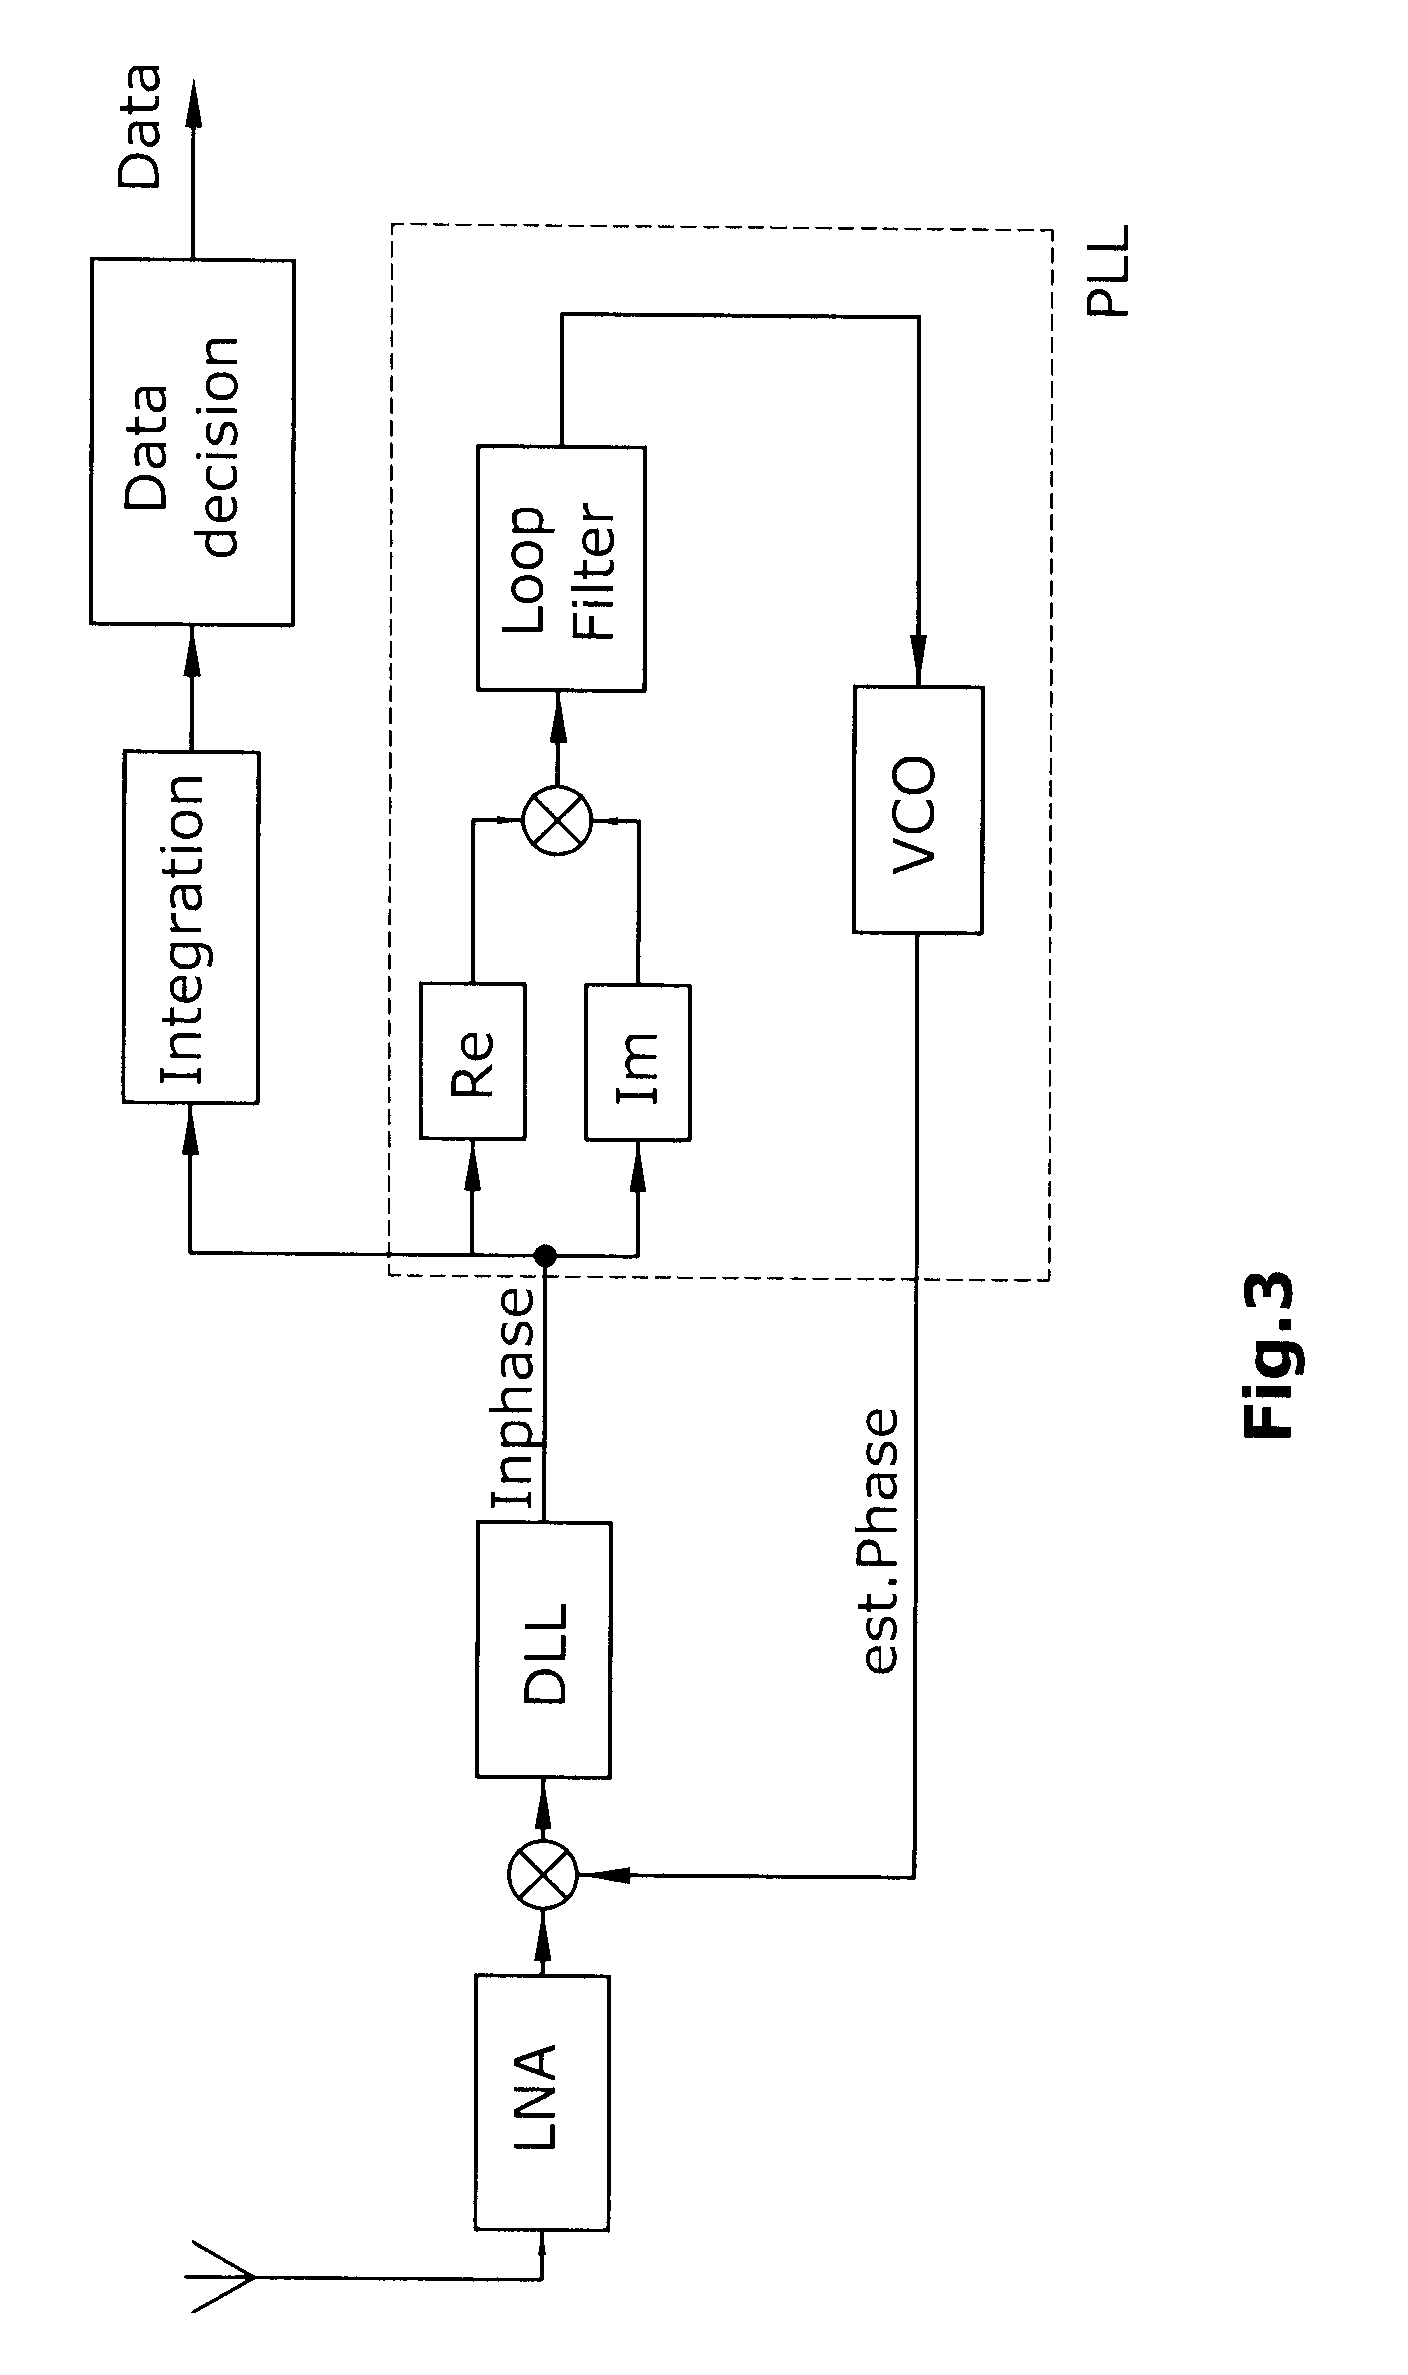 Method for estimating parameters of a navigation signal